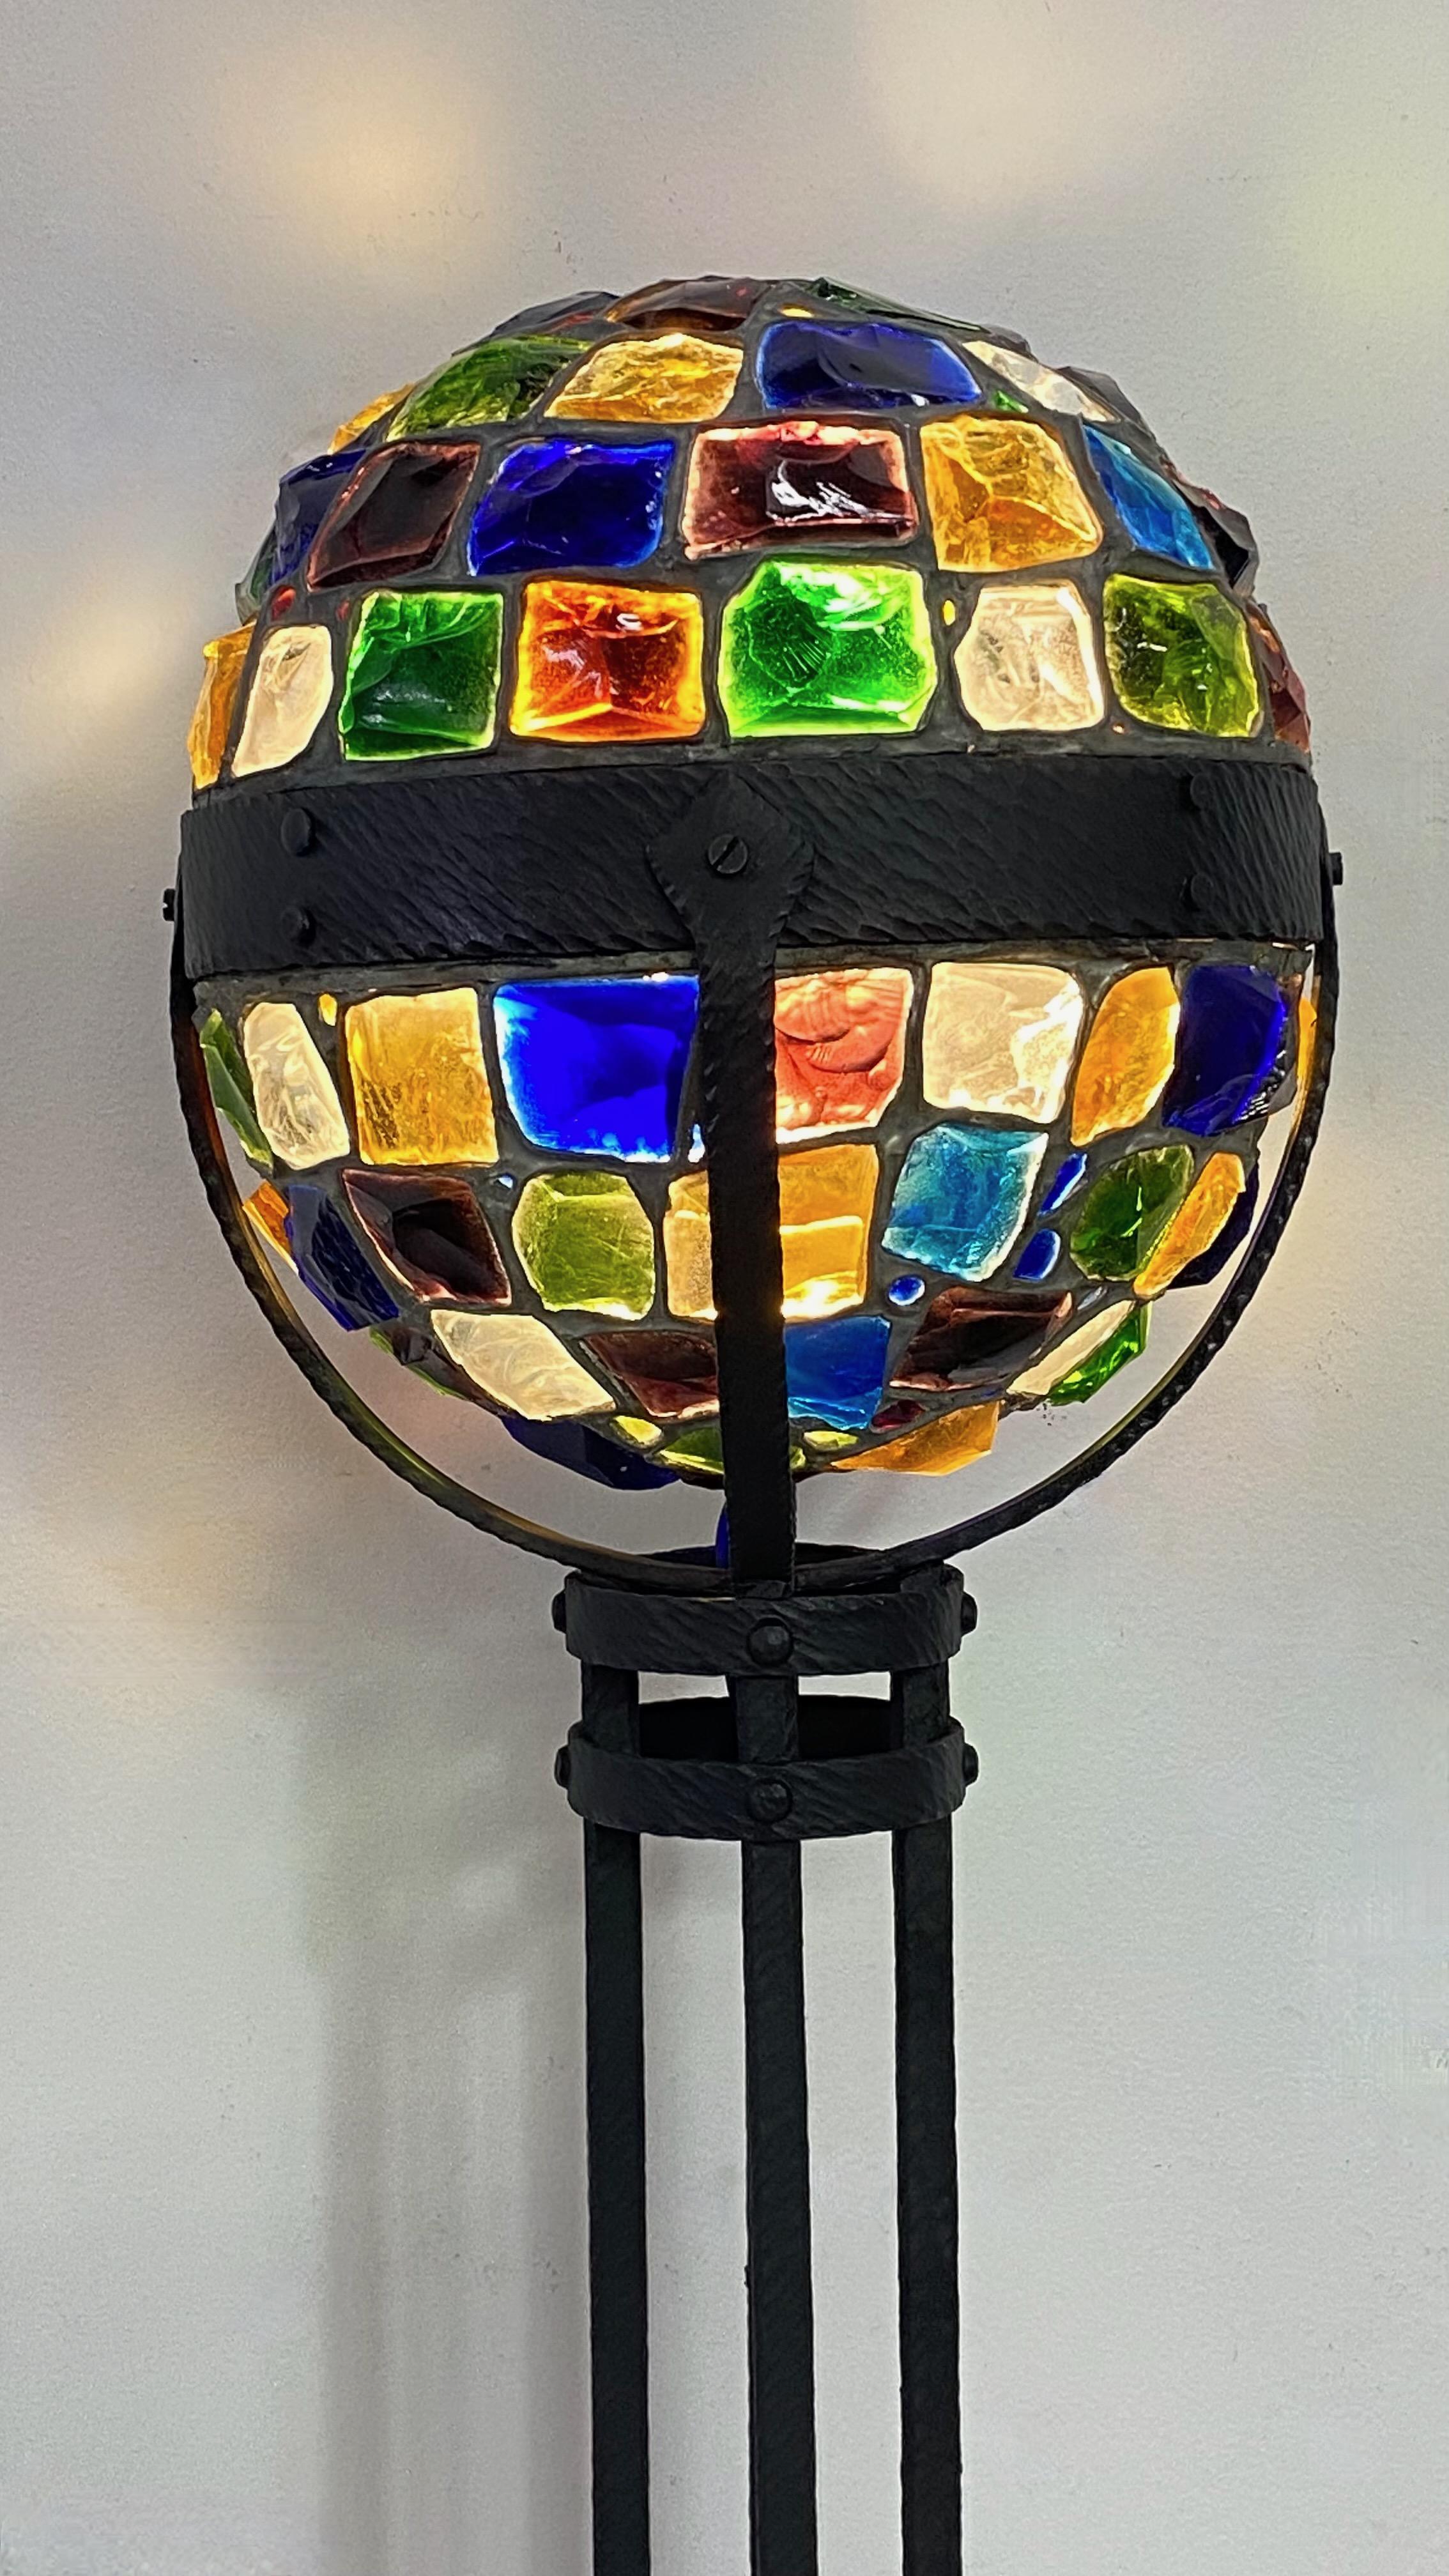 Rare and unusual Secessionist period colorful glass chunk jewel newel post lamp. Wrought iron with colorful hand cut glass jewels in vibrant colors.
Arts & Crafts - Art Nouveau Style
Recently restored and re-wired. 
The square base measures 8